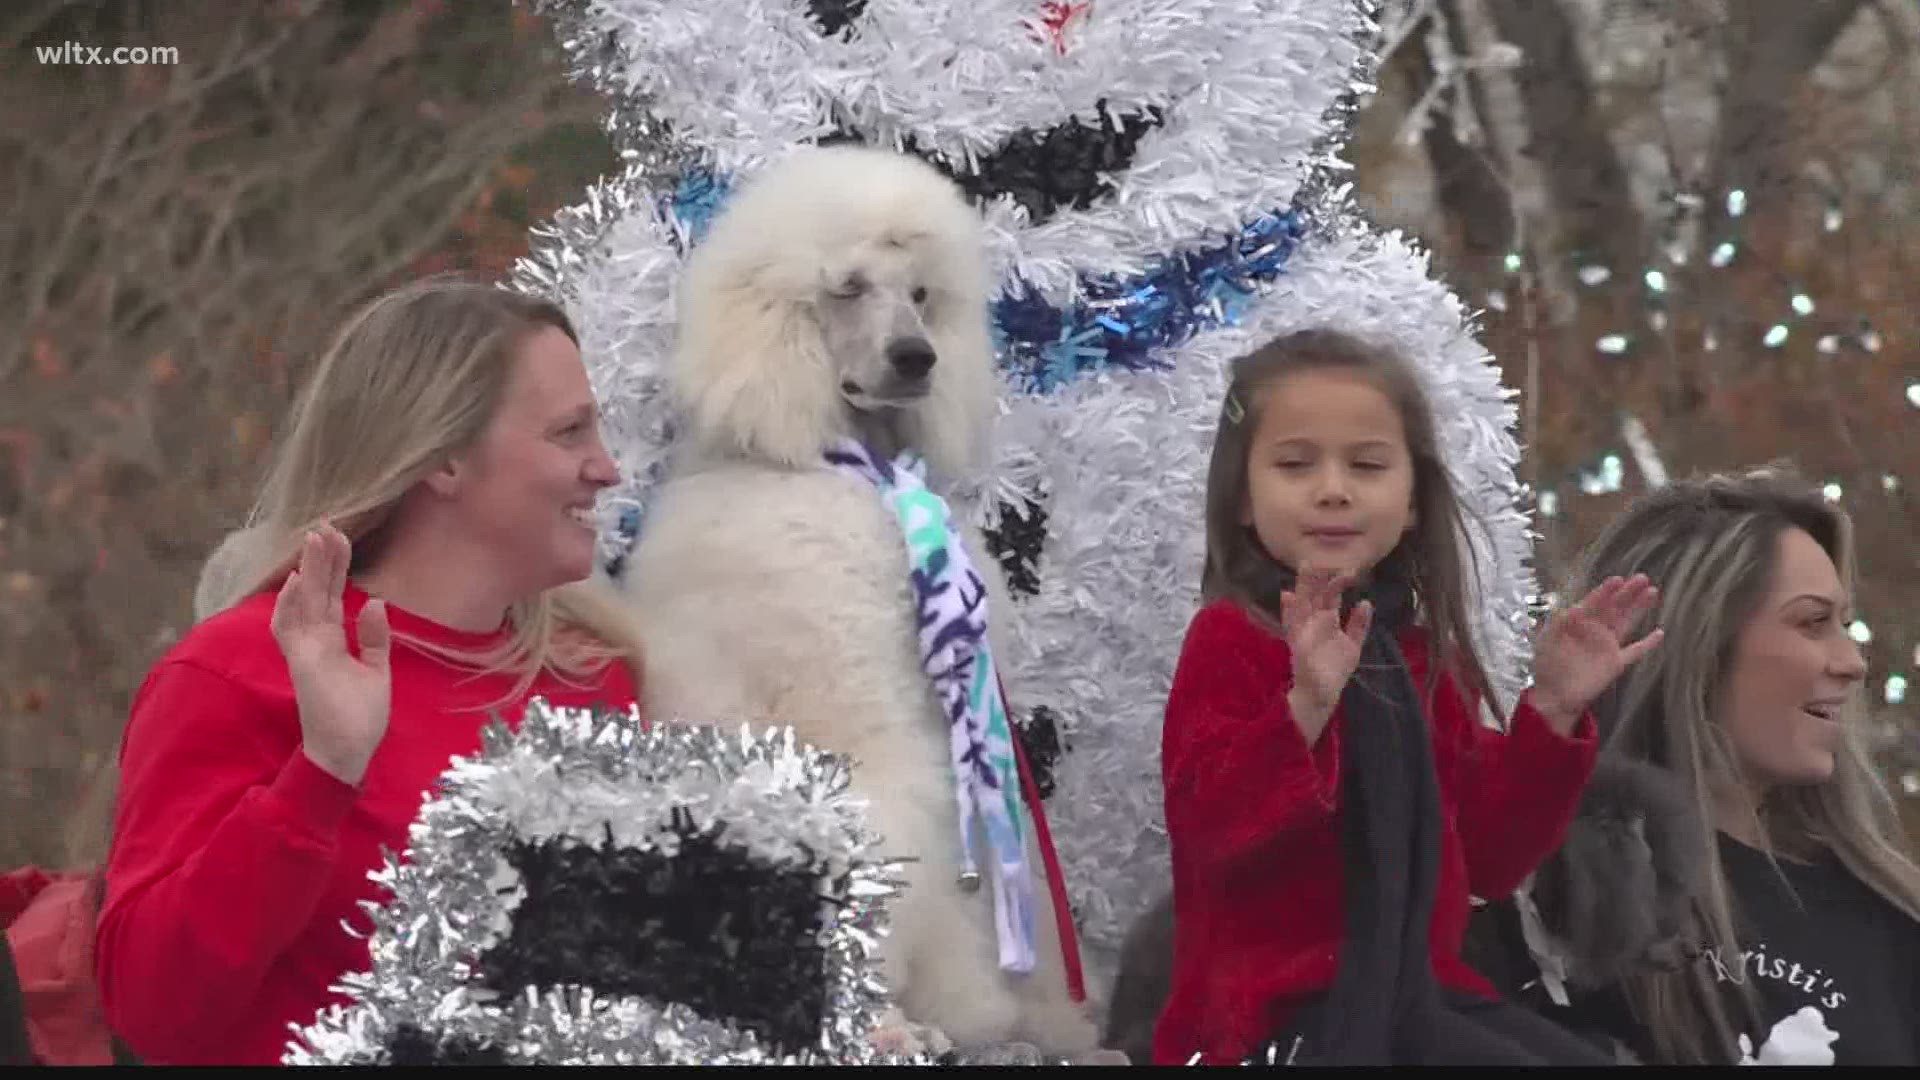 The Town of Lexington hosted their Christmas Parade Sunday